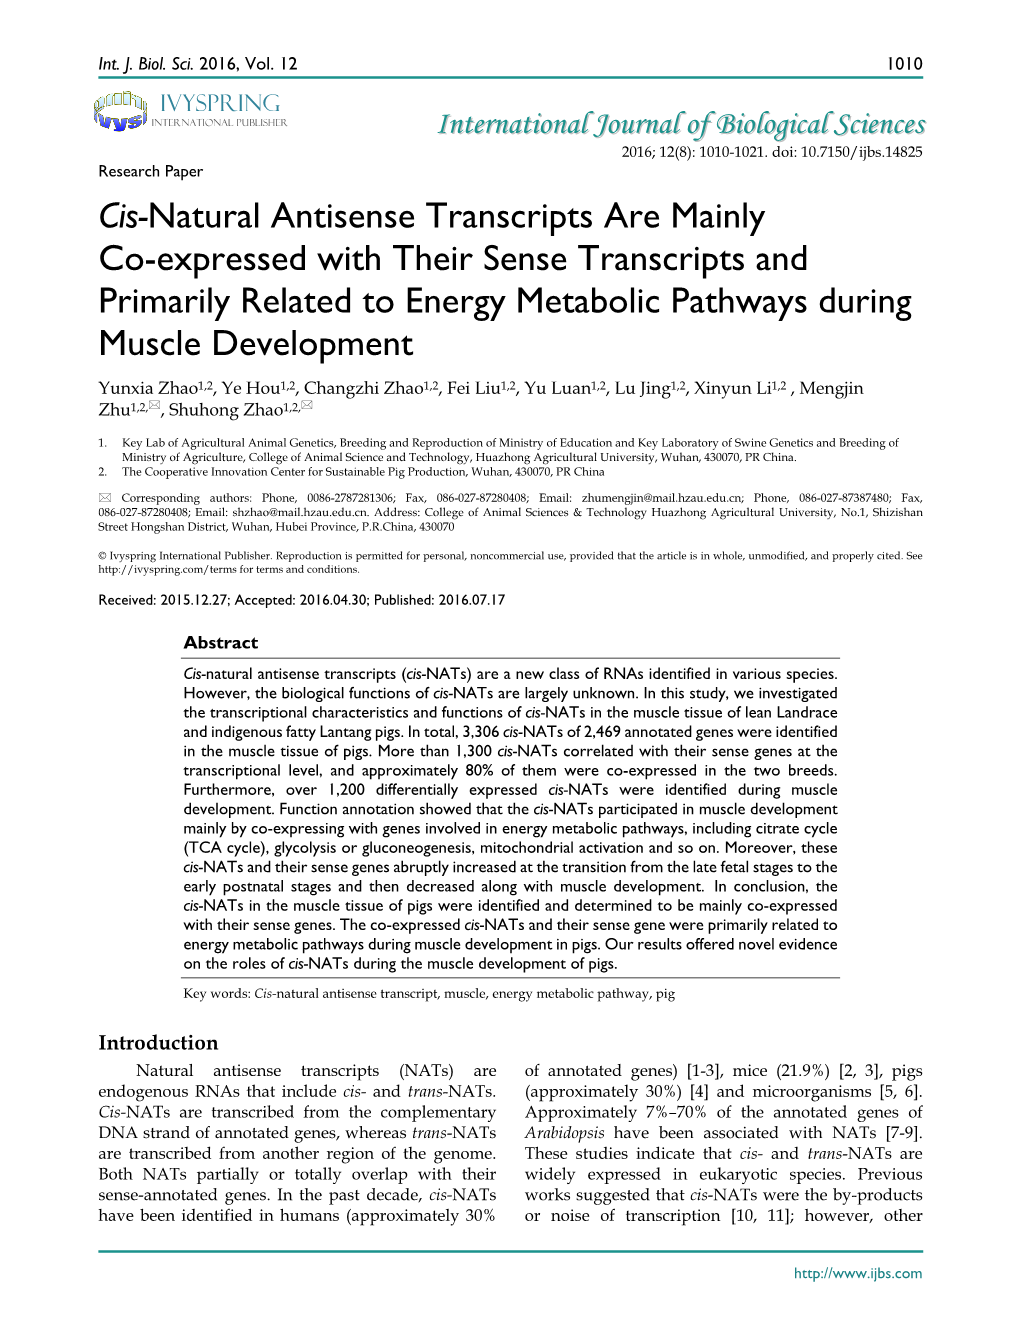 Cis-Natural Antisense Transcripts Are Mainly Co-Expressed with Their